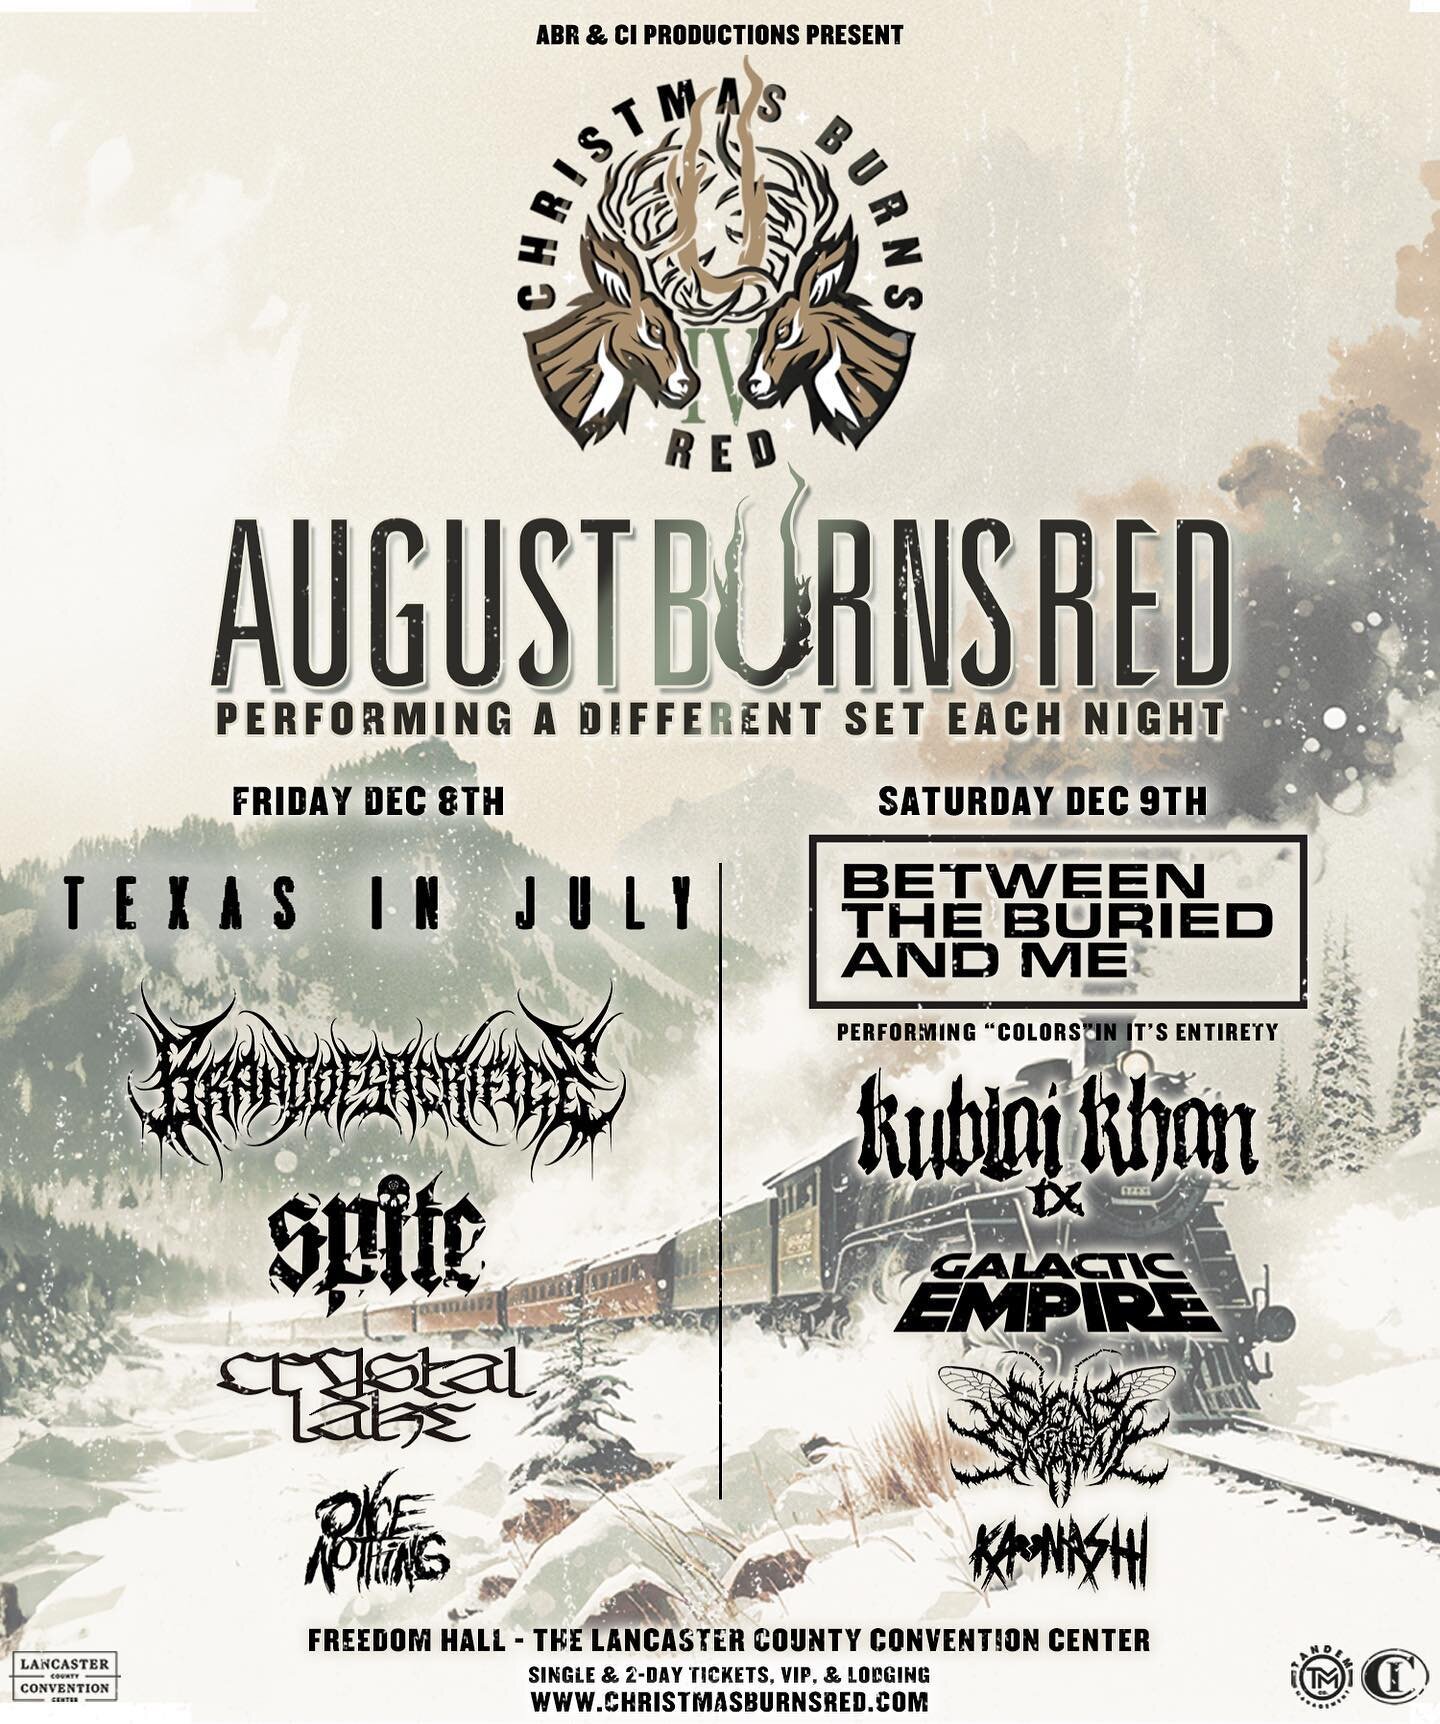 THE FULL LINEUP FOR CHRISTMAS BURNS RED IV IS FINALLY HERE!

December 8th &amp; 9th, 2023!

🎫Tickets &amp; Lodging Packages: https://christmasburnsred.com

So excited to have these bands joining us this year:

August Burns Red performing a different